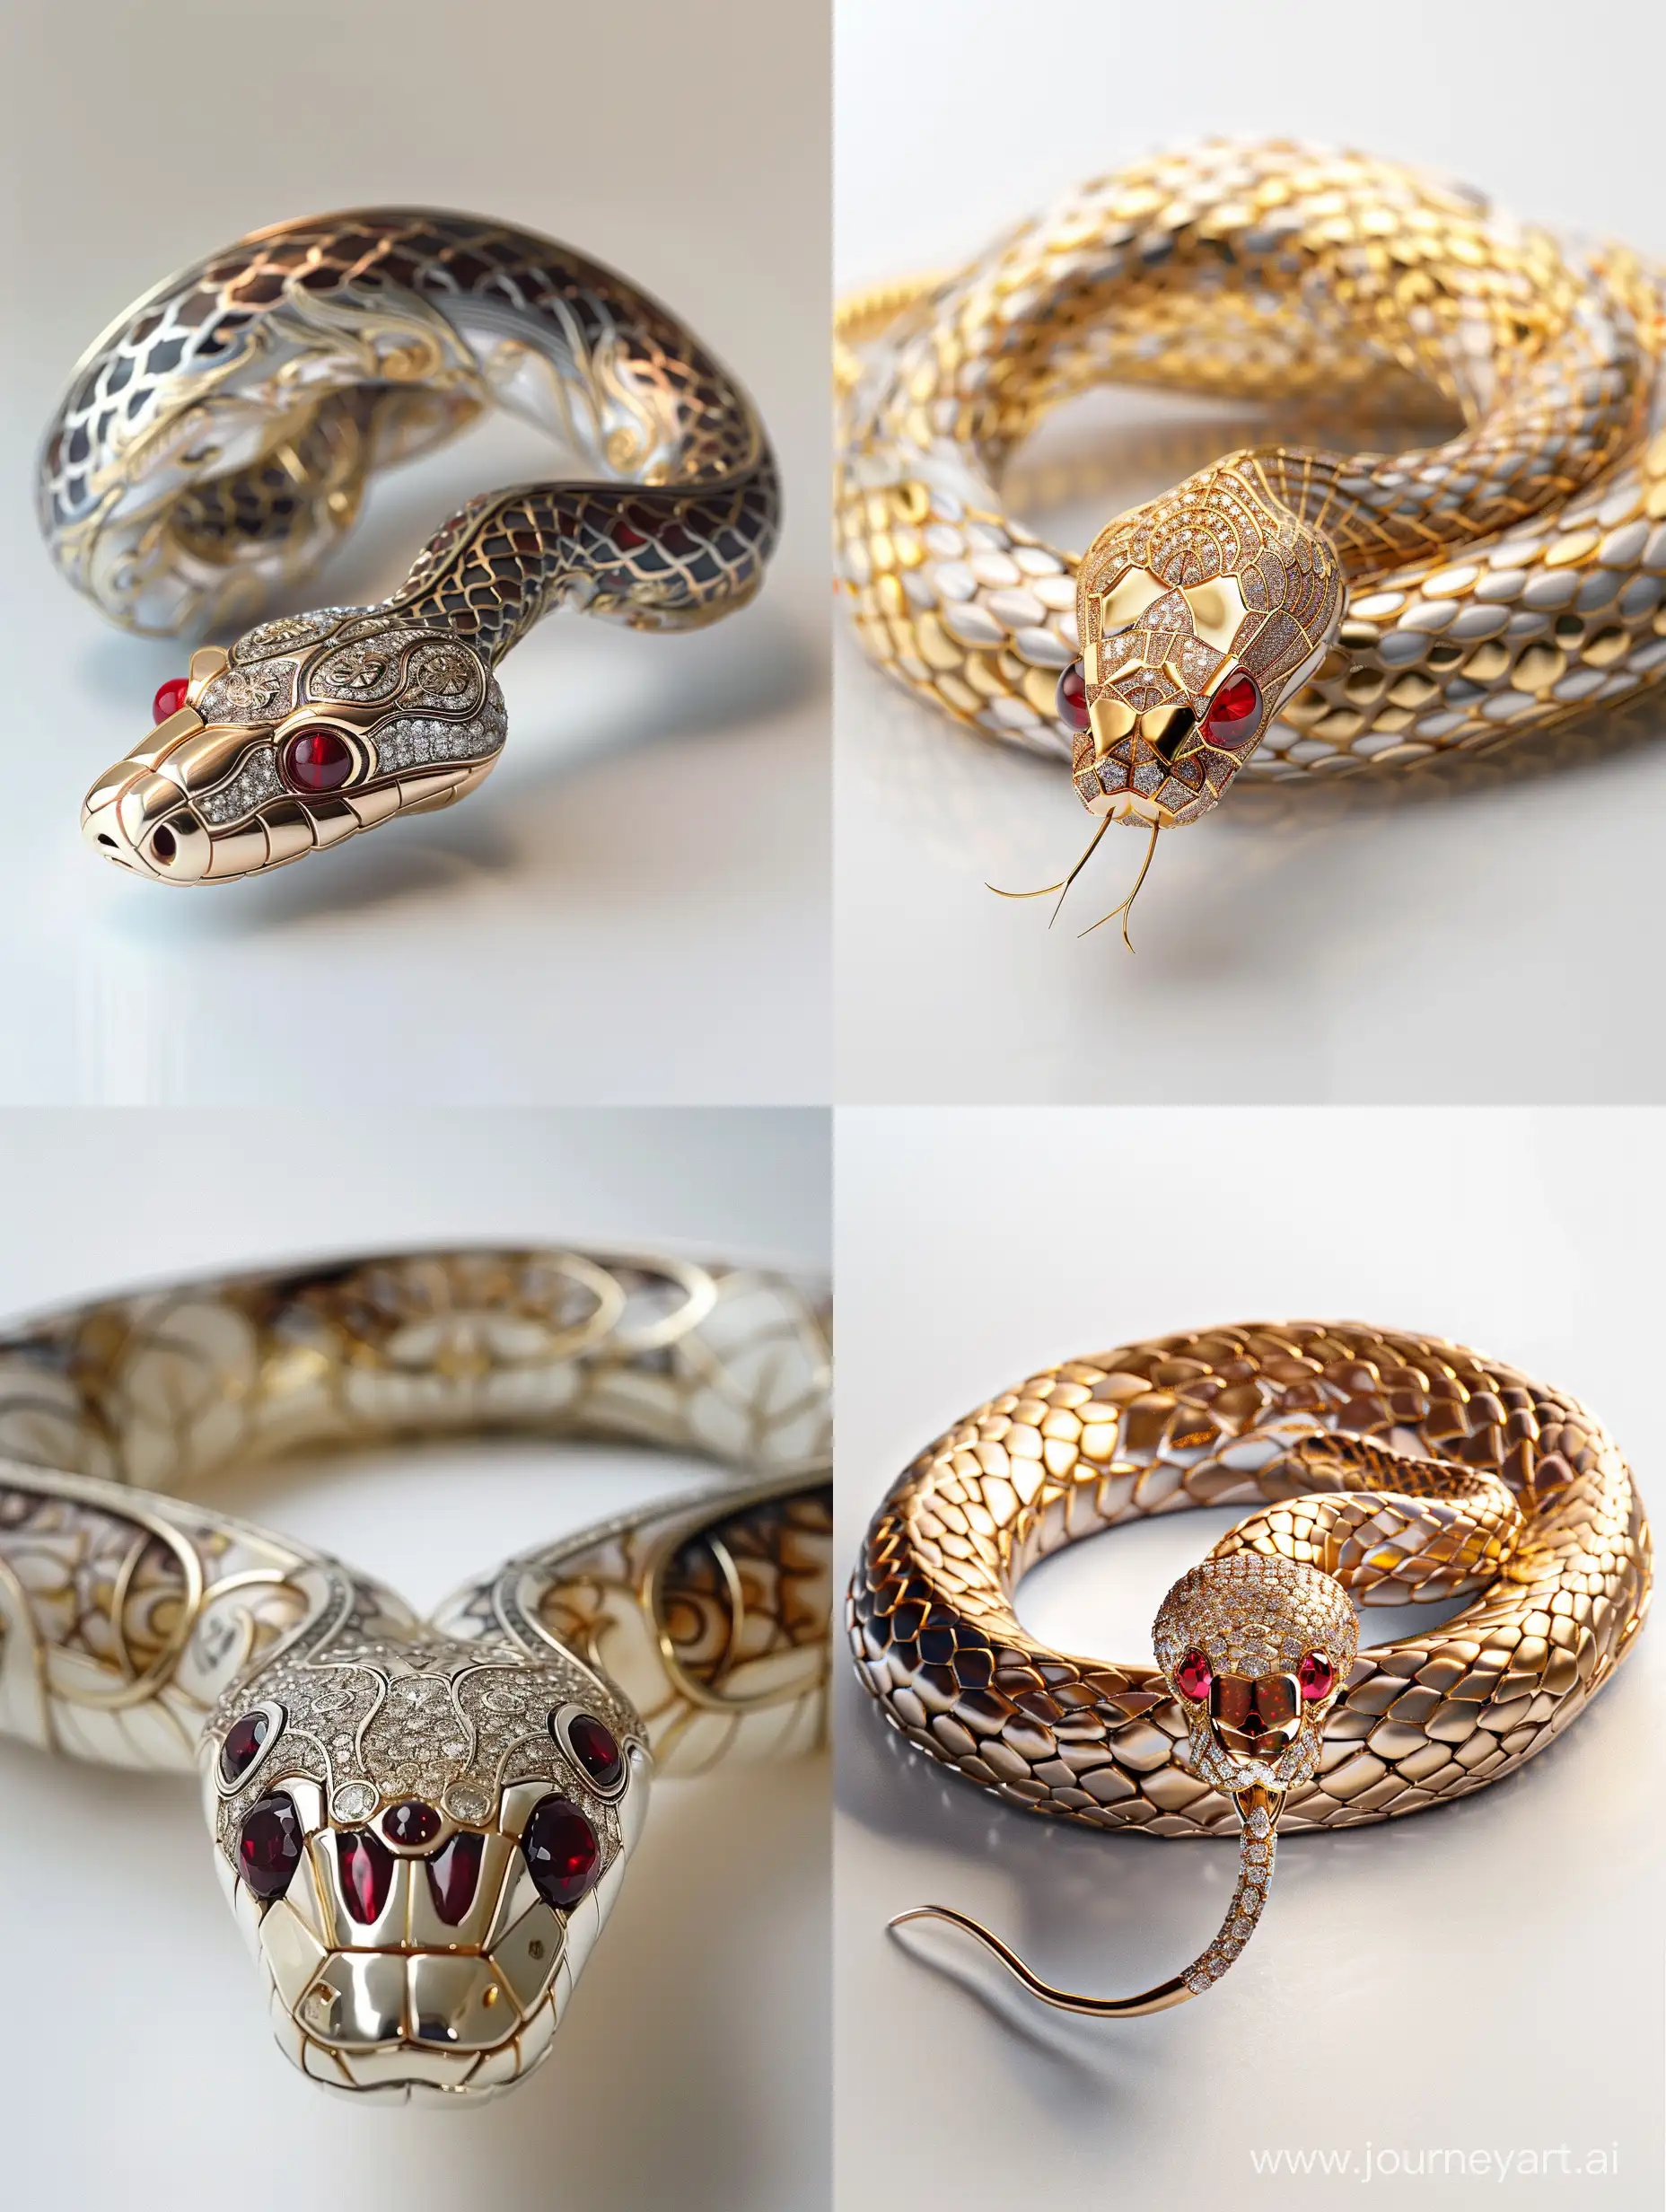 Art-Nouveau-Snake-Jewelry-with-Ruby-Eyes-and-Precious-Stones